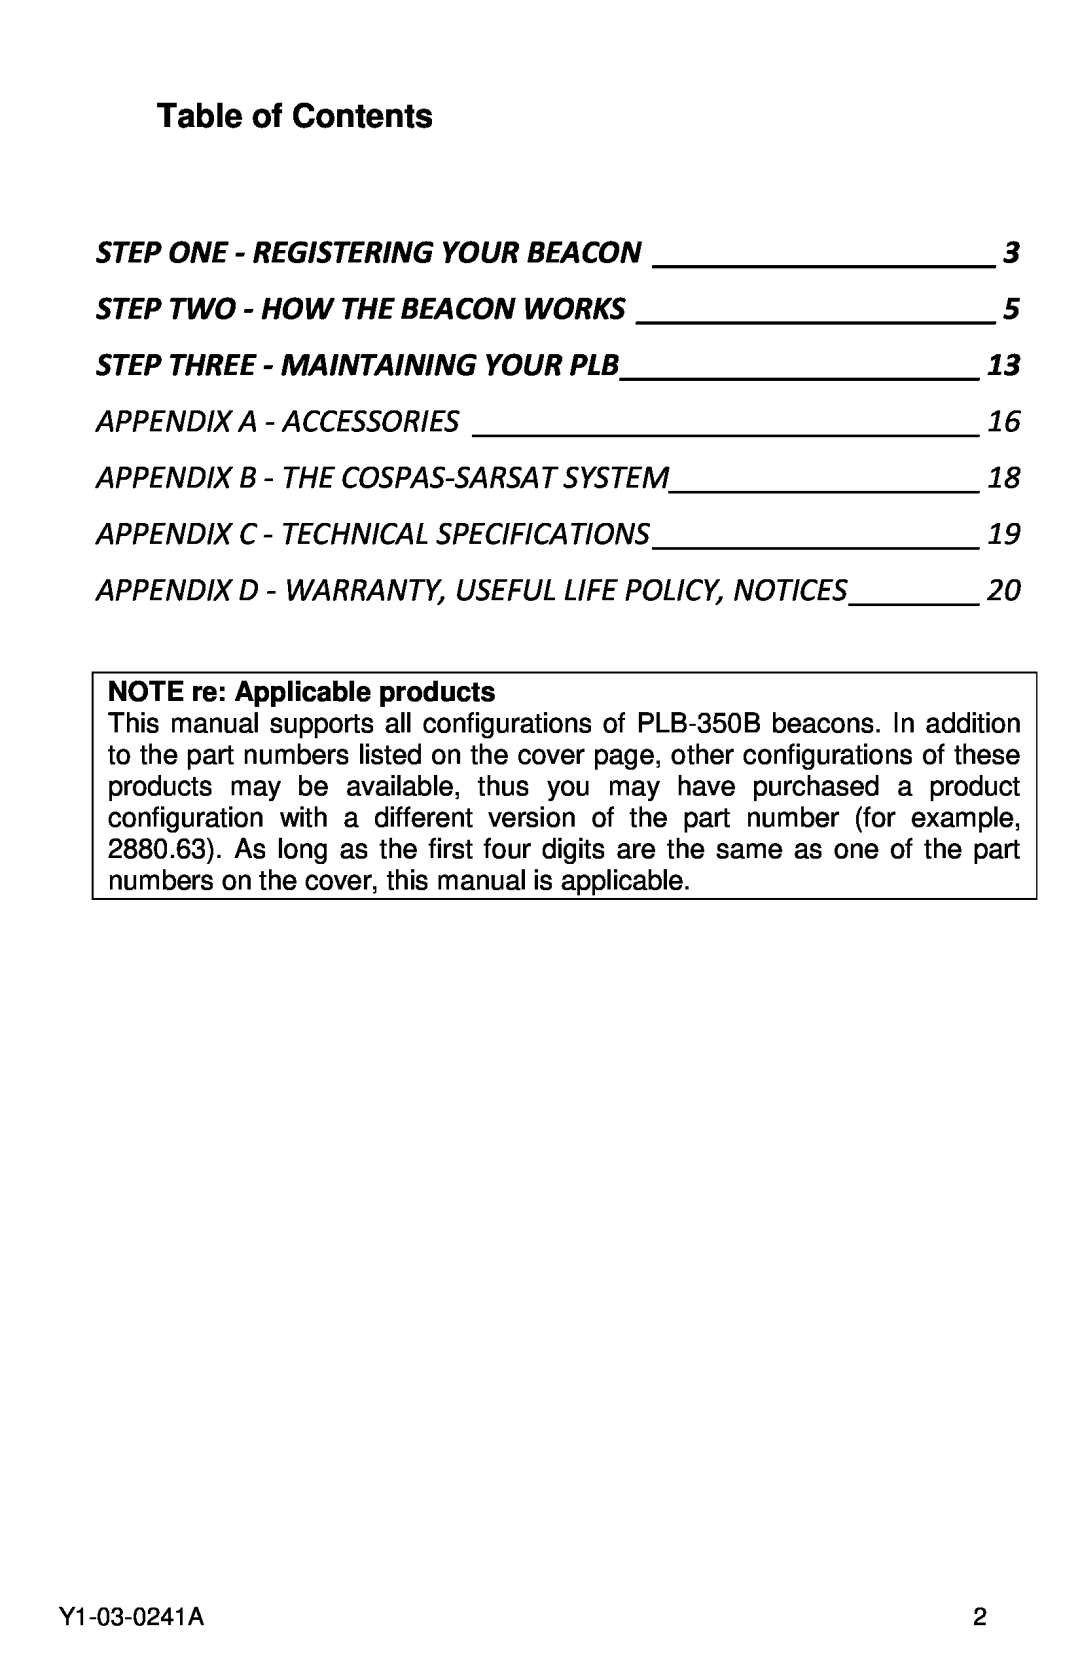 ACR Electronics 2883, PLB-350B, 2882 manual Table of Contents, NOTE re Applicable products, Step Three - Maintaining Your Plb 